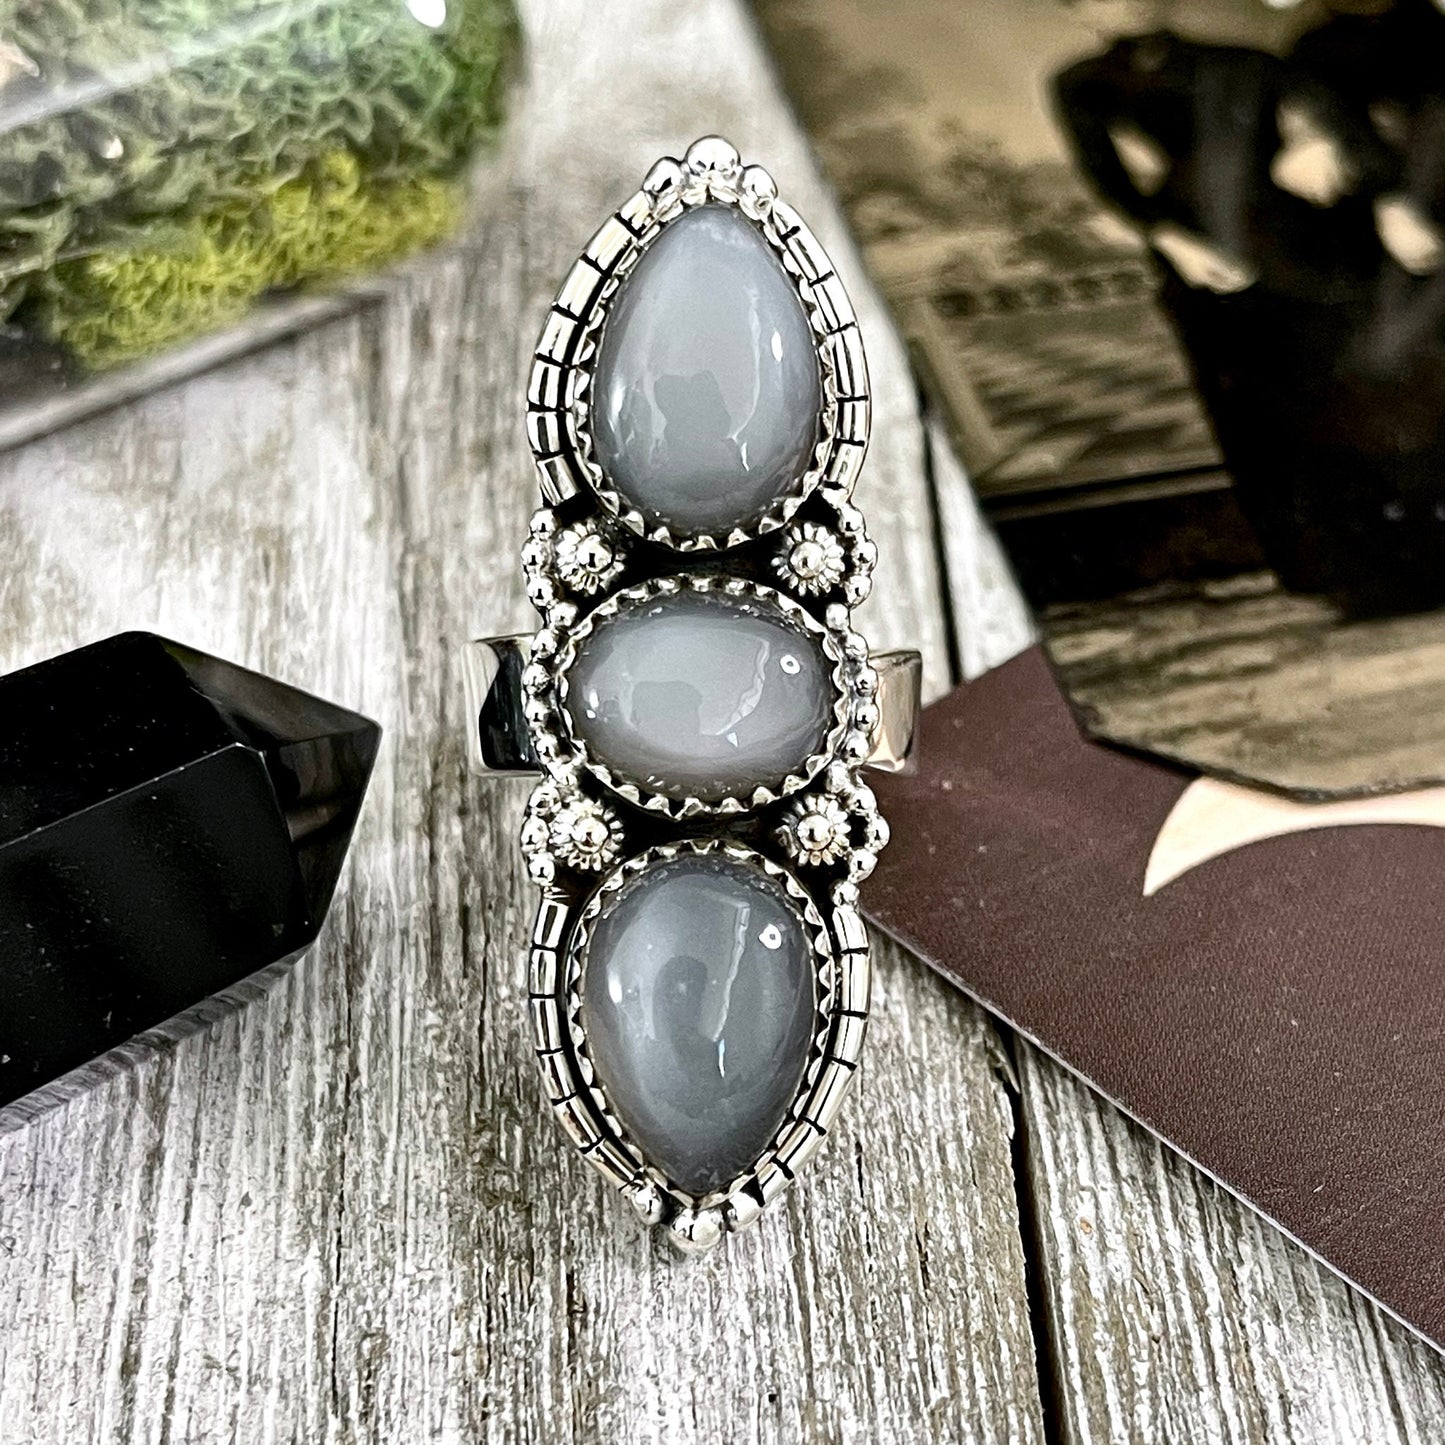 3 Stone Ring, Big Stone Ring, Bohemian Ring, Boho Jewelry, Boho Ring, Crystal Ring, Etsy Id 1064530524, Foxlark Alchemy, Foxlark- Rings, Gift For Woman, Grey Moonstone, Gypsy Ring, Jewelry, Rings, Statement Rings, Wholesale